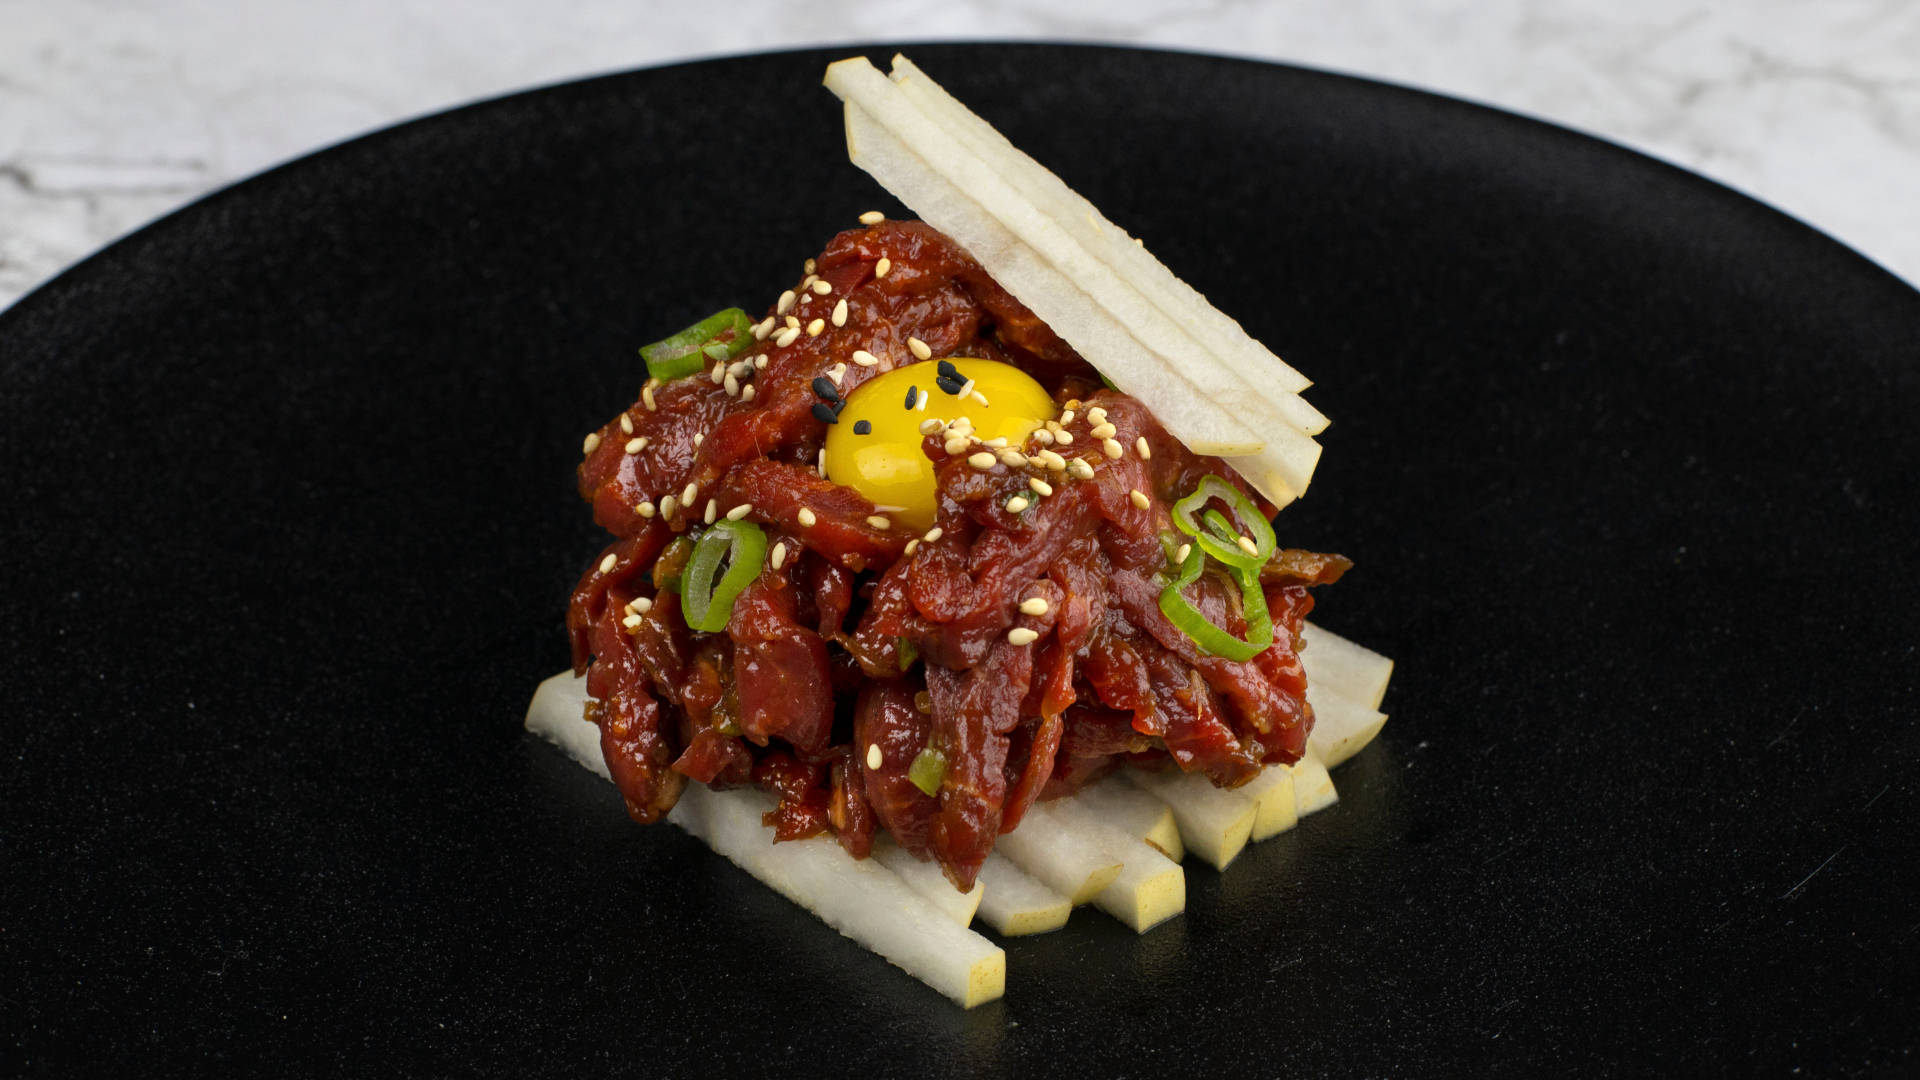 Yukhoesteak Tartare Is Not A Sentence Related To Computer Or Mobile Wallpaper. It Appears To Be A Dish Name. Can You Please Provide Sentences Related To Computer Or Mobile Wallpaper That You Would Like Me To Translate Into German? Wallpaper